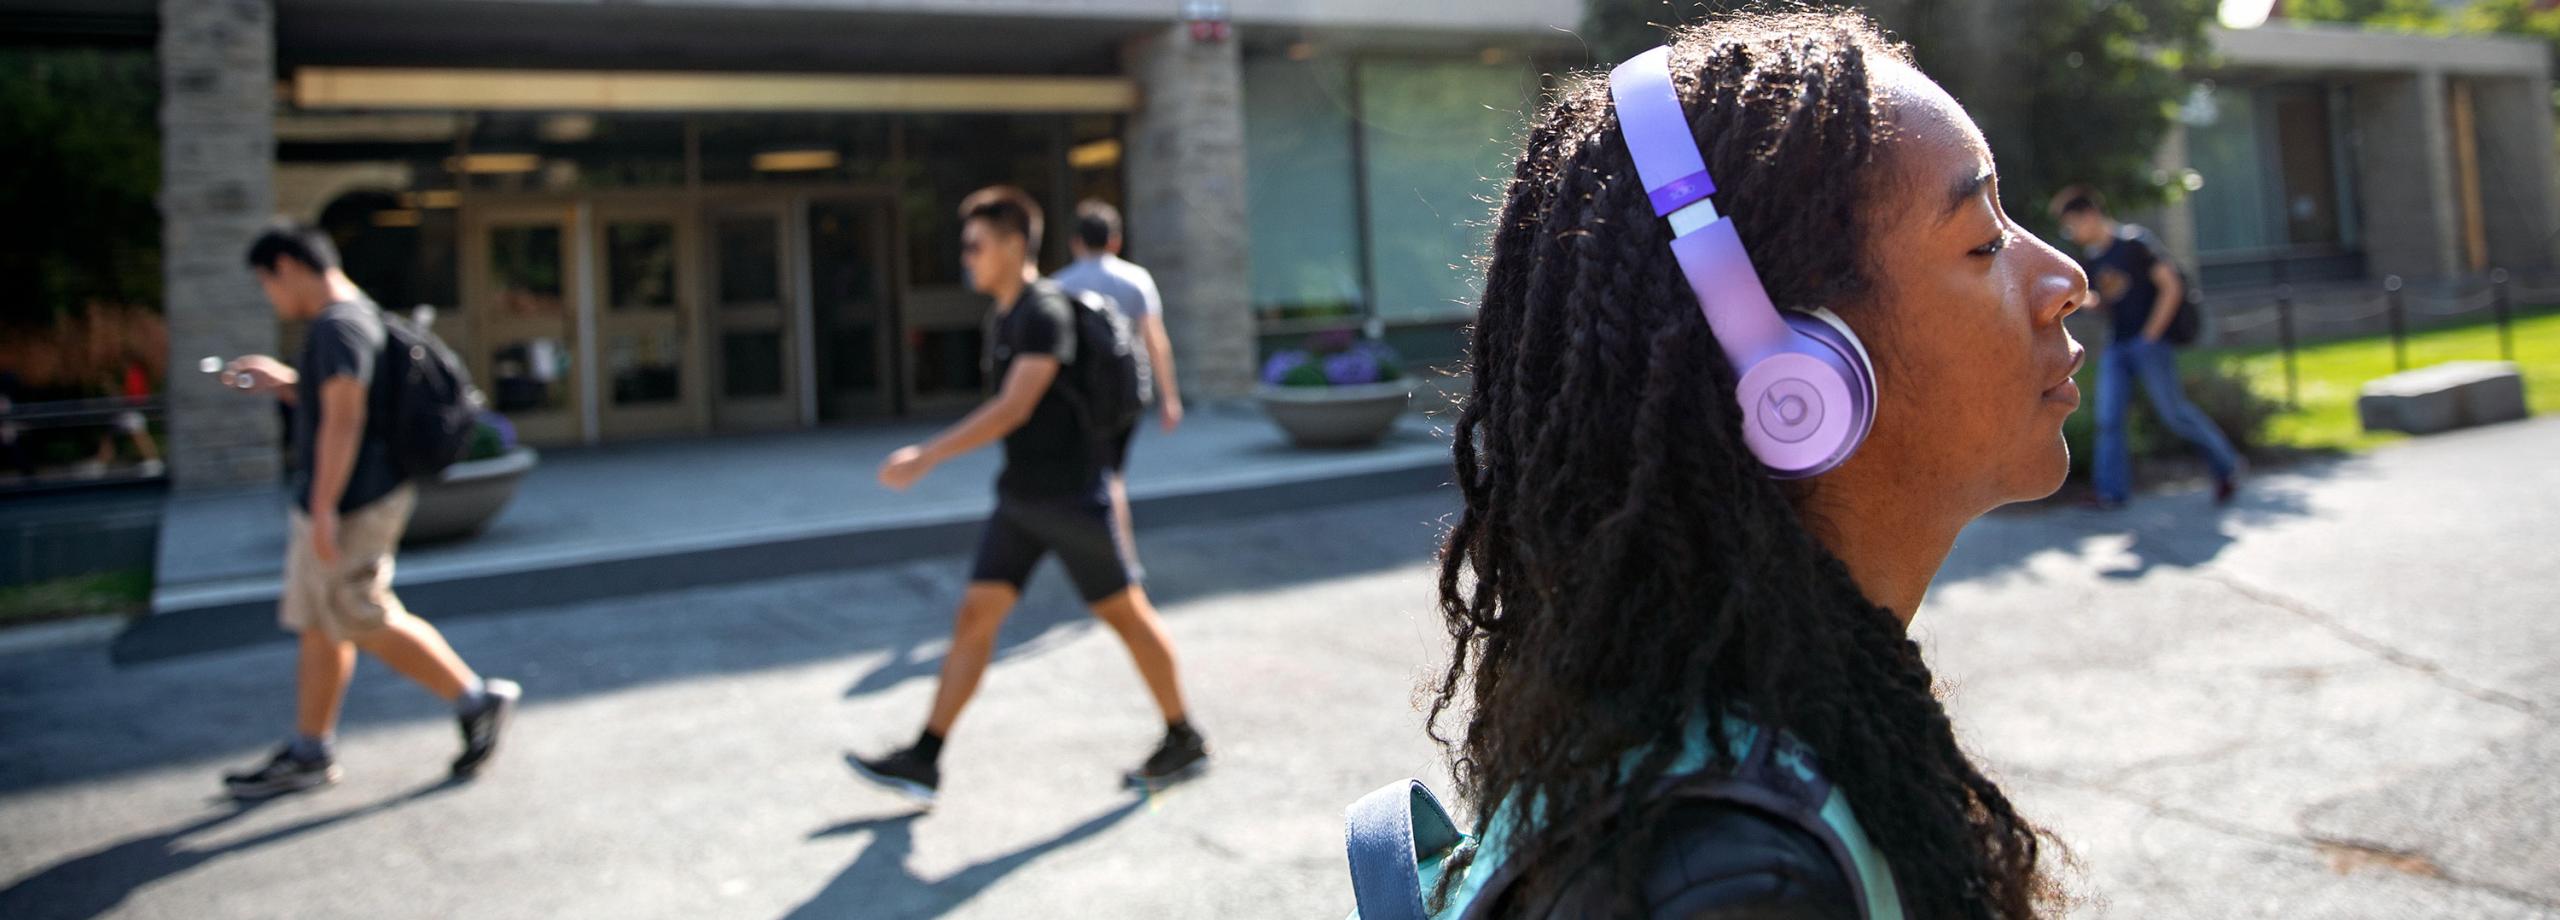 Student walking through campus with headphones on